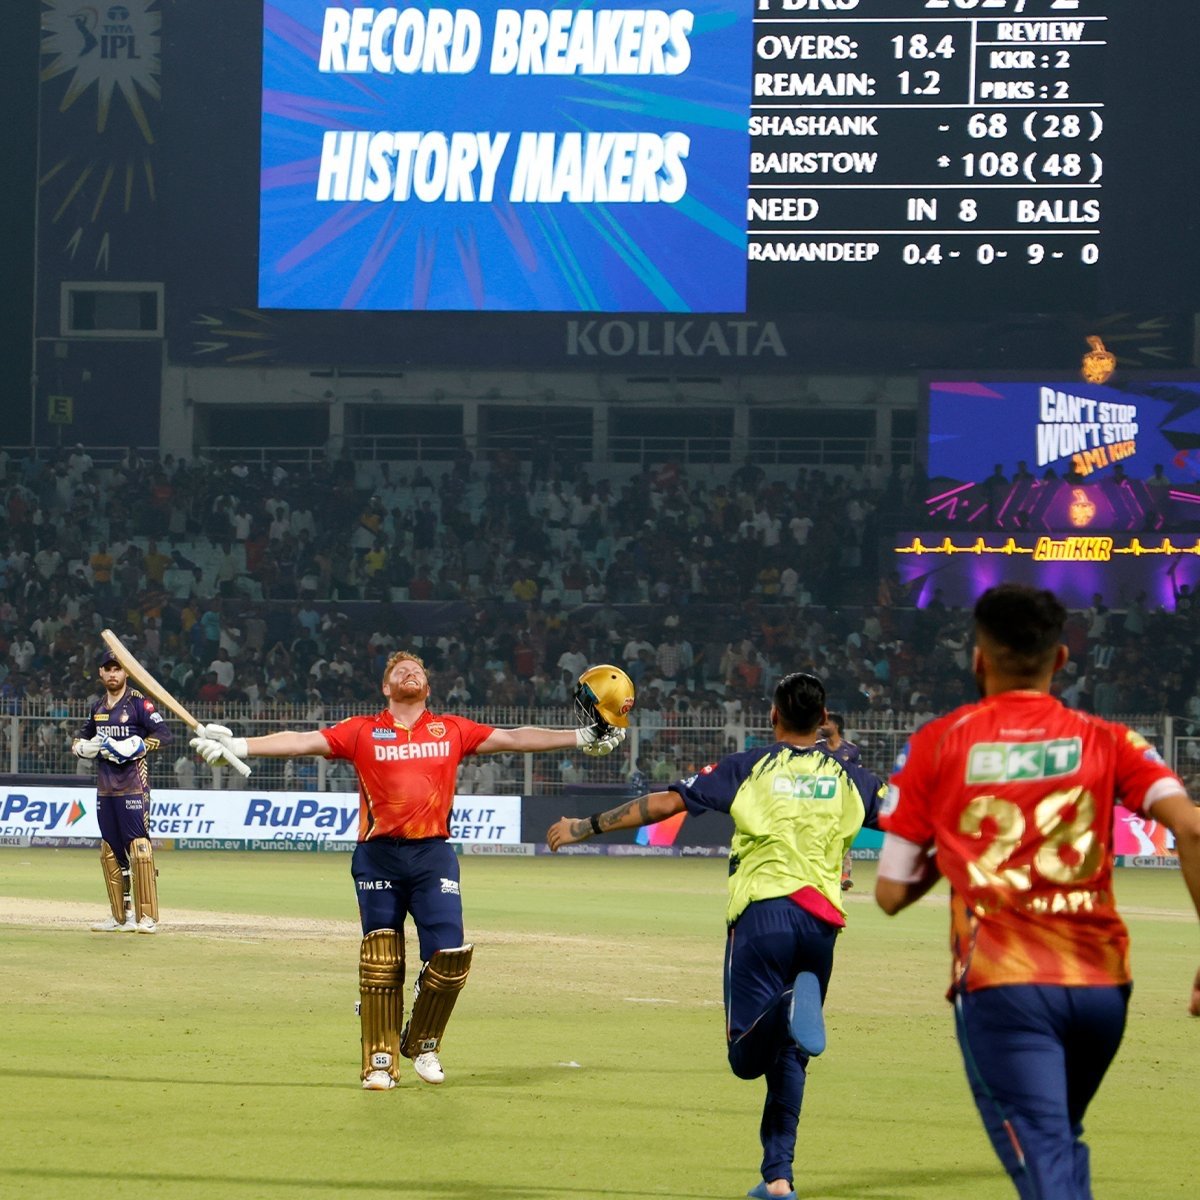 WOW! 🤩

On Friday night, if your party mood kept you away from your TV sets, you would regret! The City of Joy erupted into rare Joy watching Jonny Bairstow and Shashank Singh stroll into history - chasing & winning highest ever in IPL - 261! 

💯%Delight

#PBKSvsKKR #KKRvsPBKS